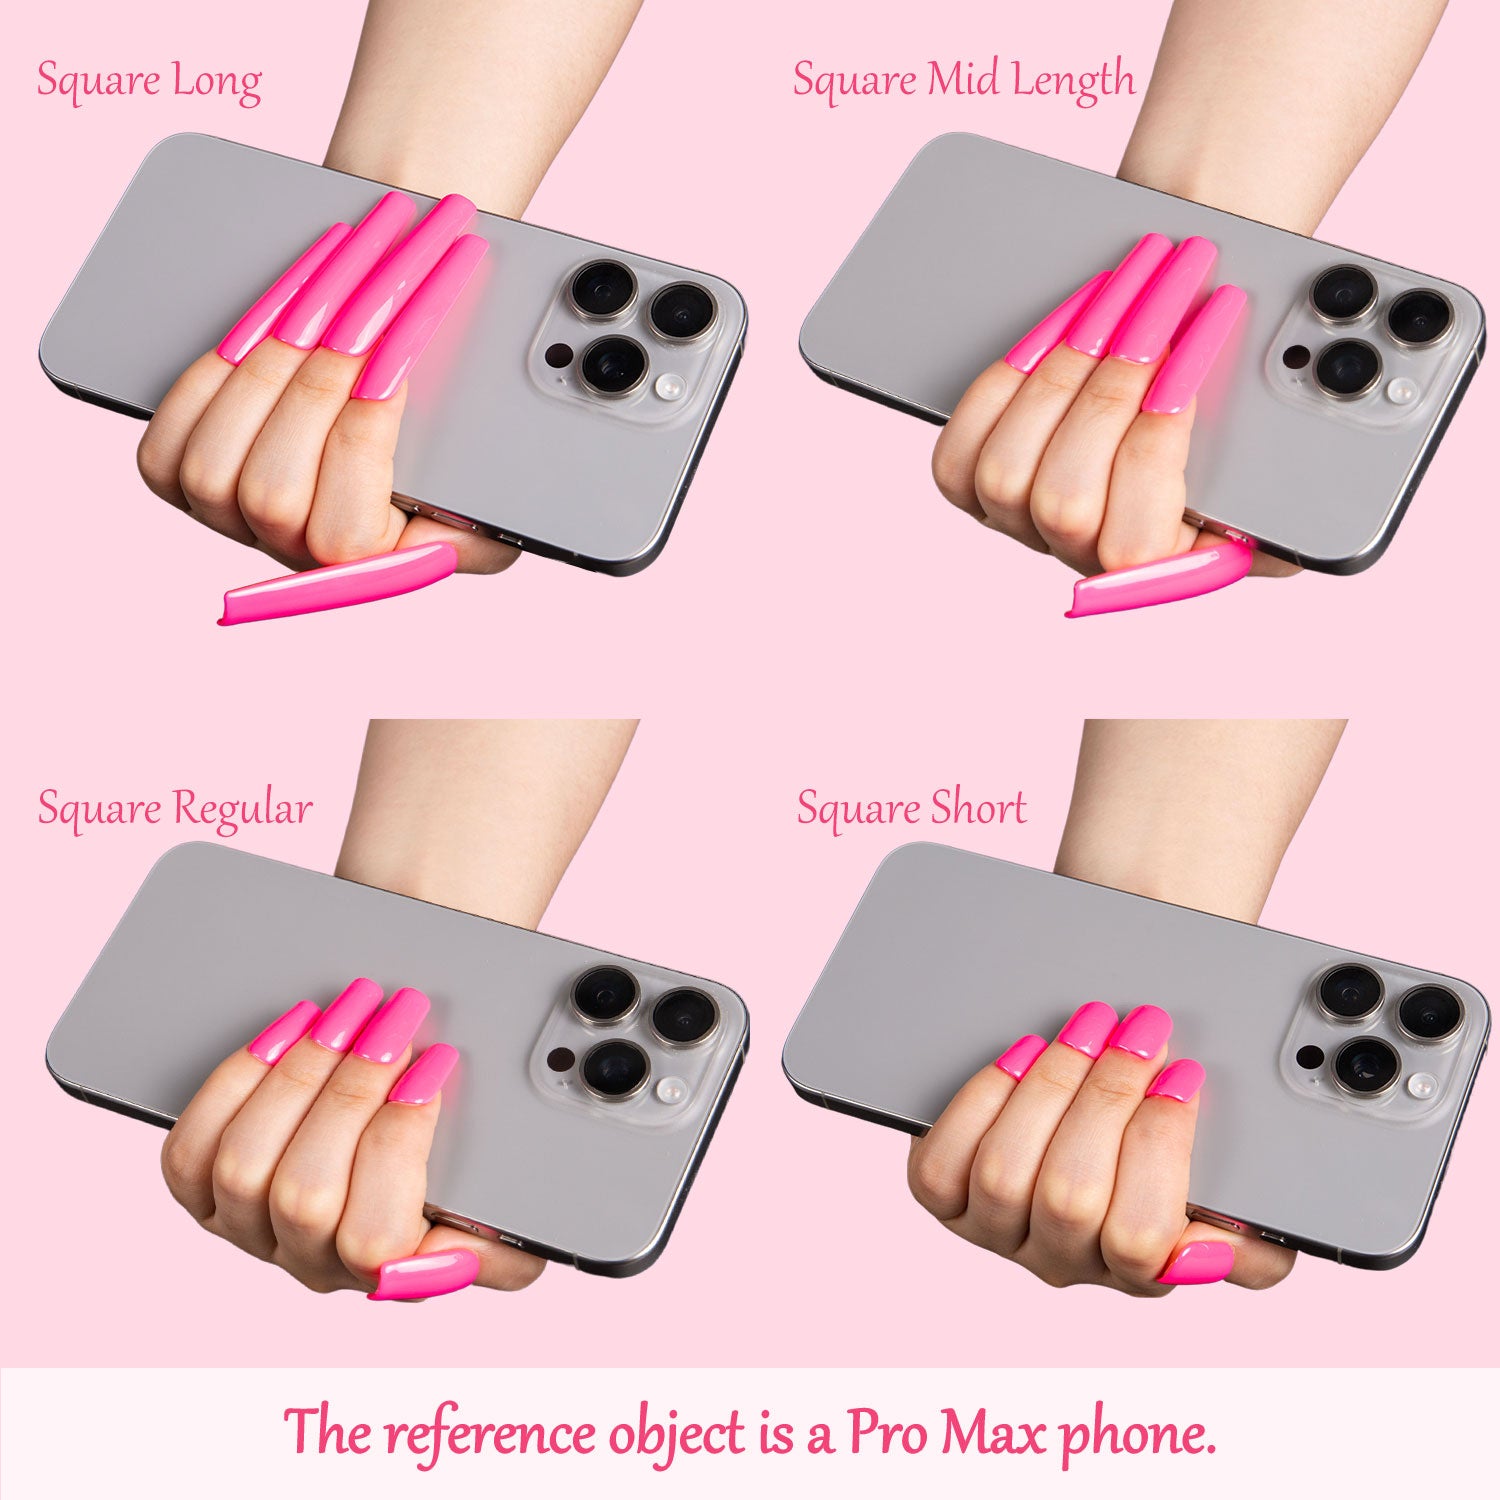 Comparison of four square-shaped pink press-on acrylic nails on hands holding a Pro Max phone, showcasing Square Long, Square Mid Length, Square Regular, and Square Short lengths